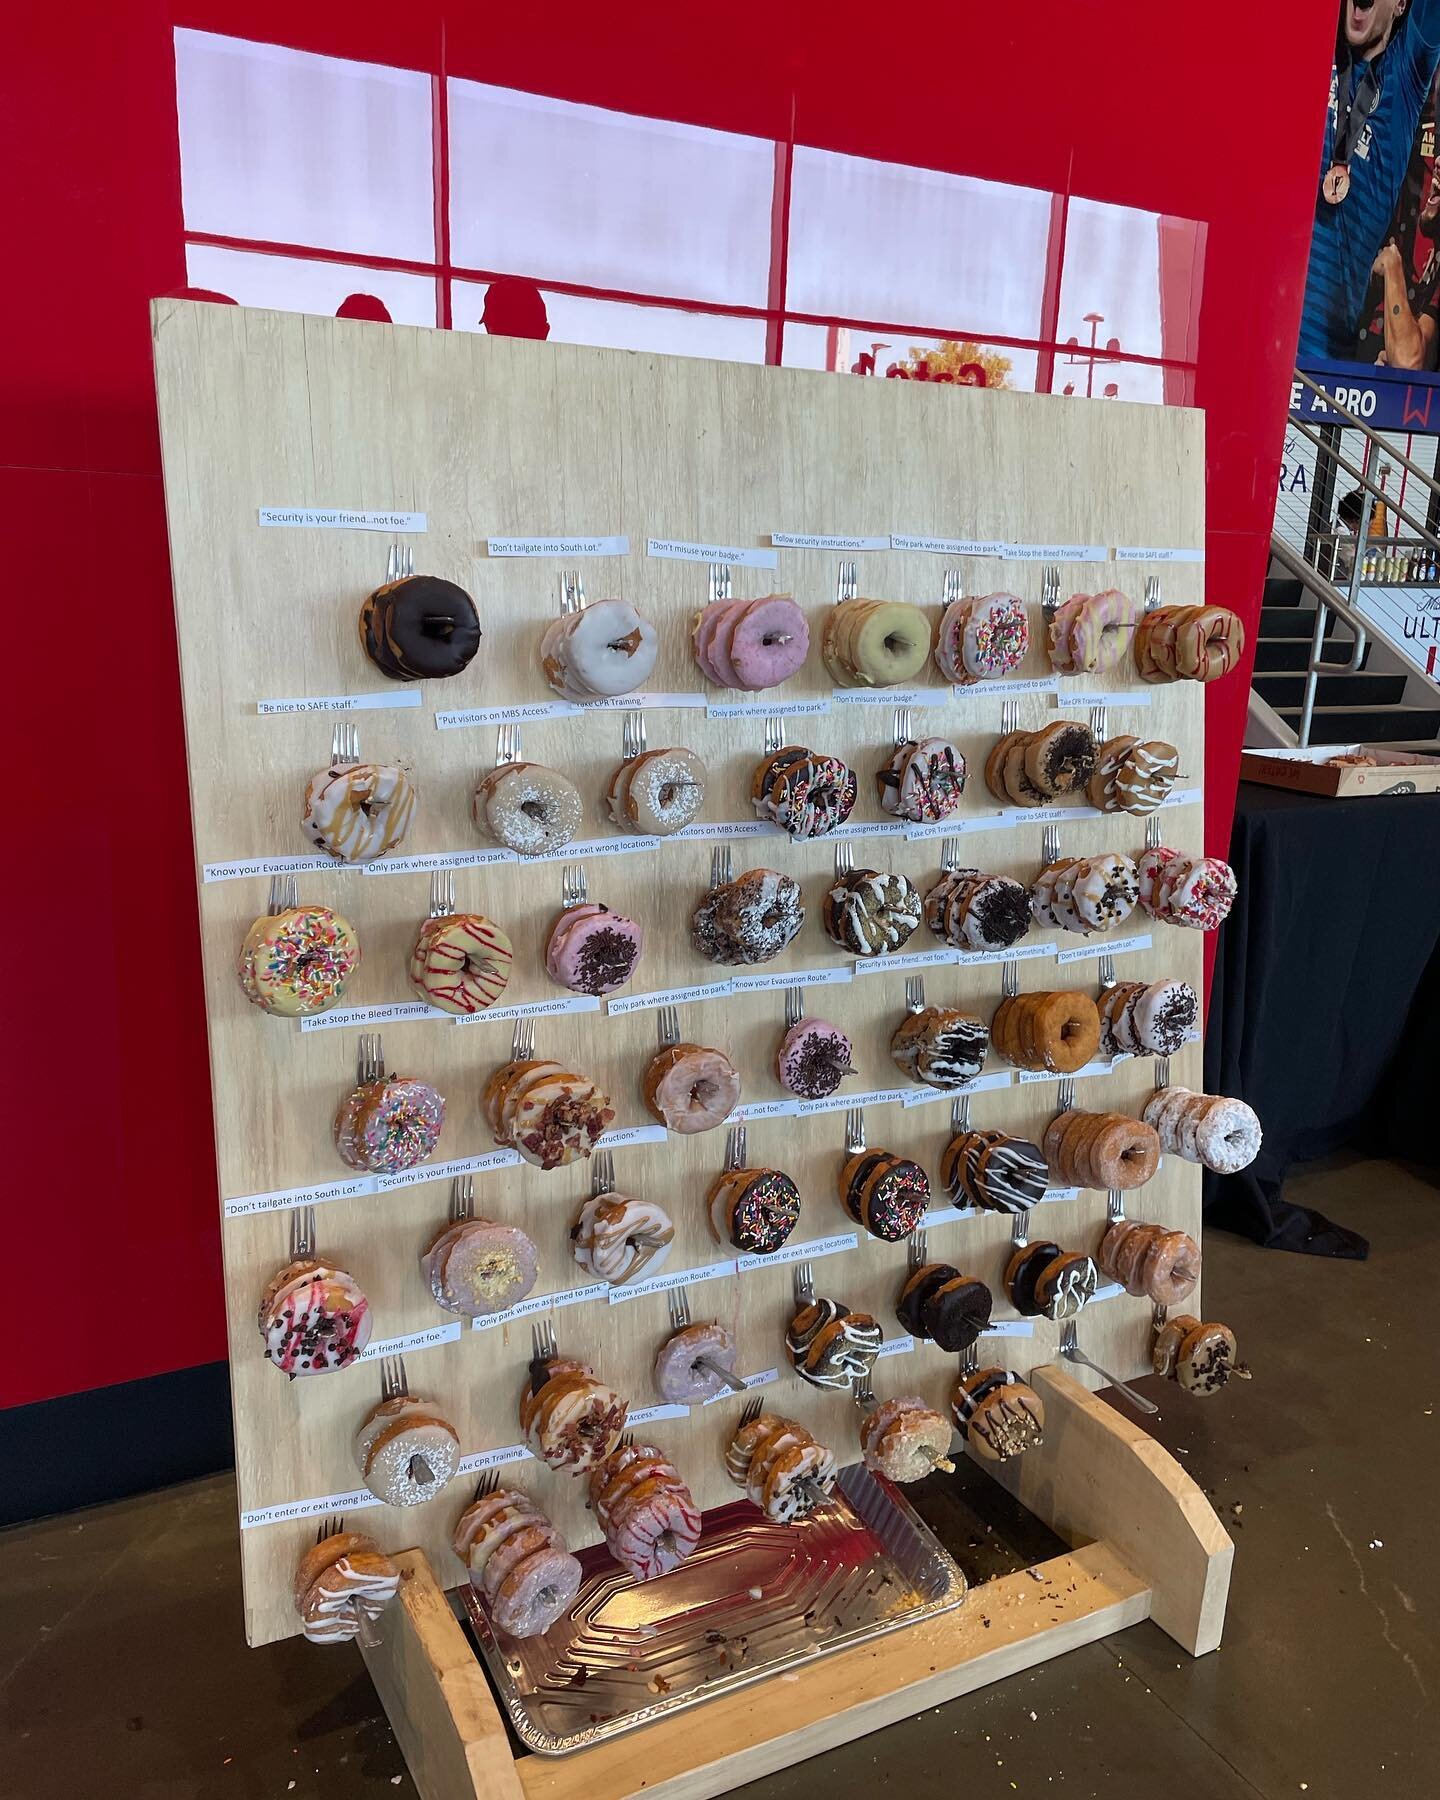 Donuts and Apps! @mercedesbenzstadium is putting on a special event for their incredible security staff! -Chicken salad wontons
-Buffalo chicken pinwheels
-Caprese tortellini skewers 
-Spinach and artichoke dip w/ fresh bread
-Philly cheesesteak slid